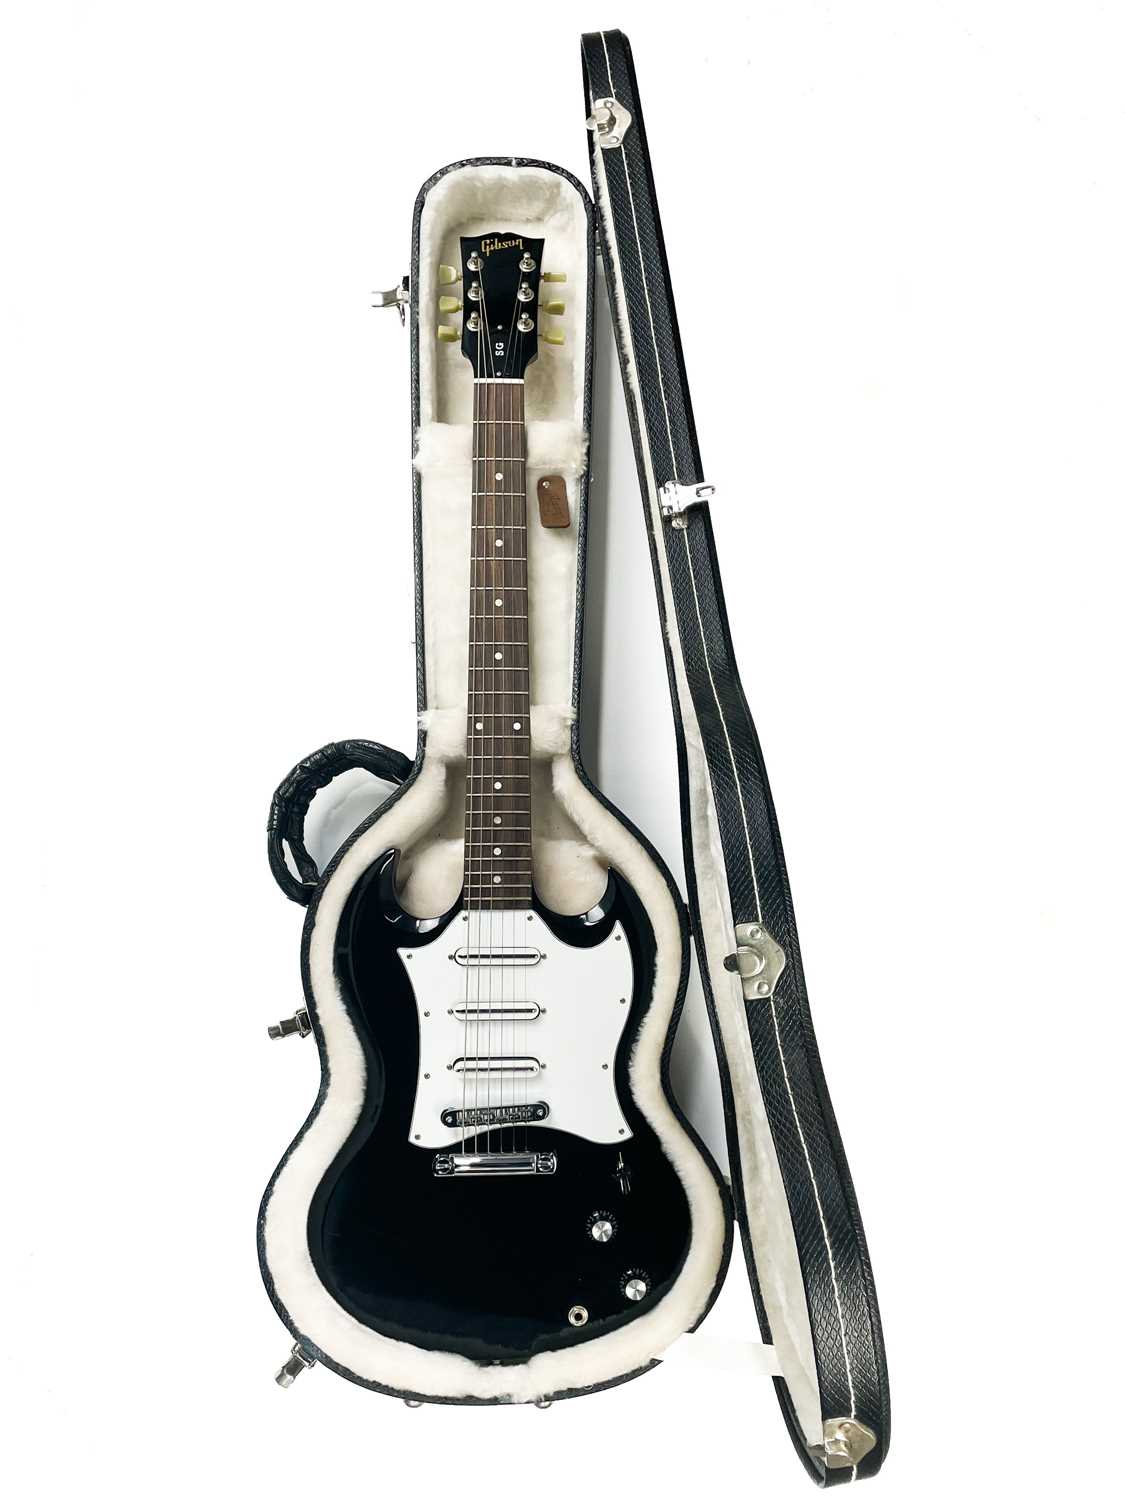 A 2007 Gibson limited edition SG Special SG-3 electric guitar. - Image 3 of 6